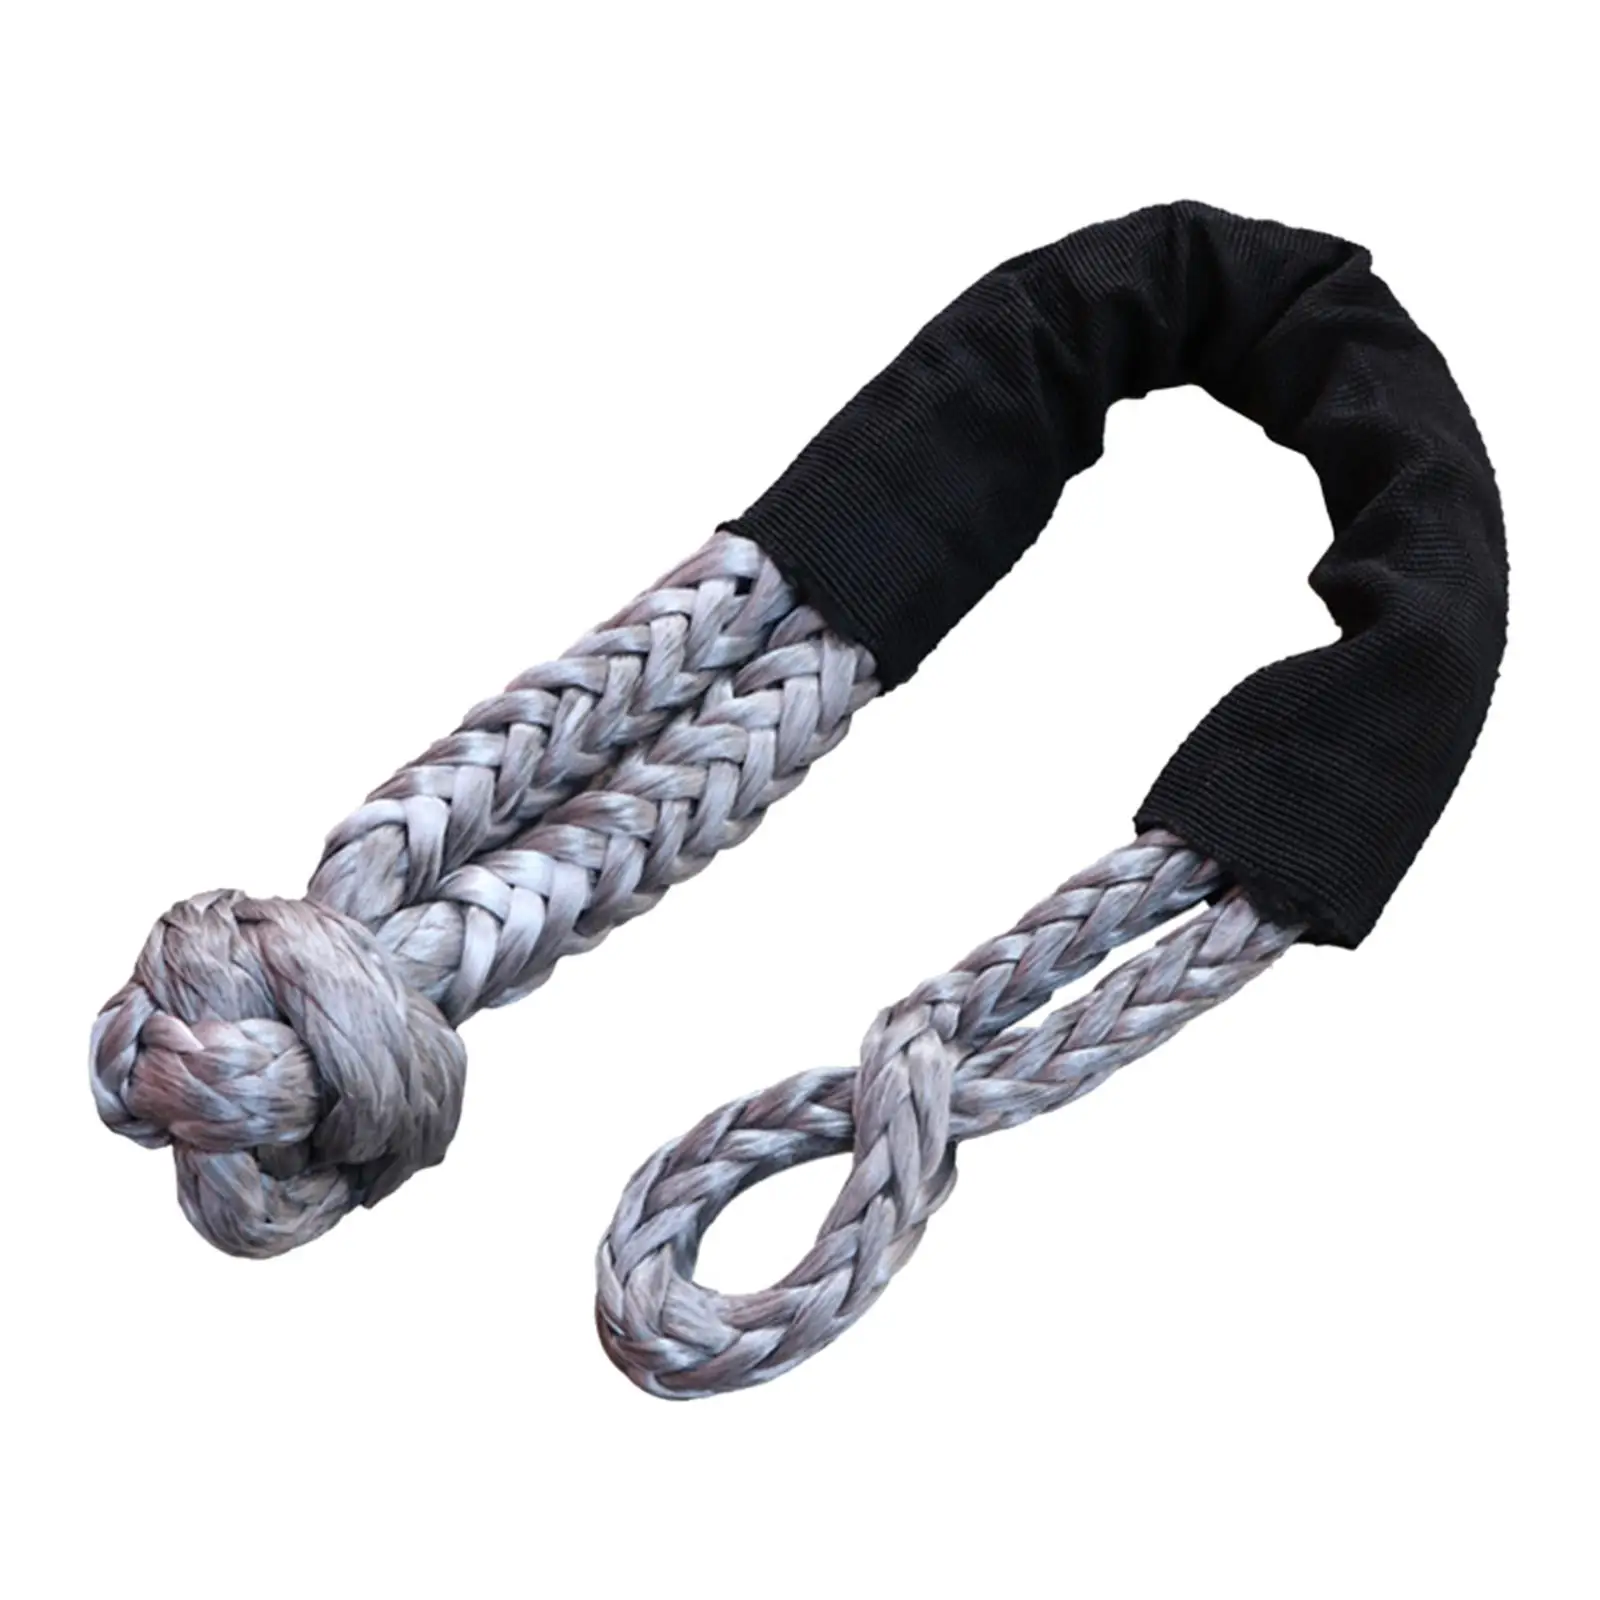 Soft Shackle Car Breakdowns Strong Durable Protective Sleeve Tow Rope for Sailing Towing Trucks Vehicles ATV UTV